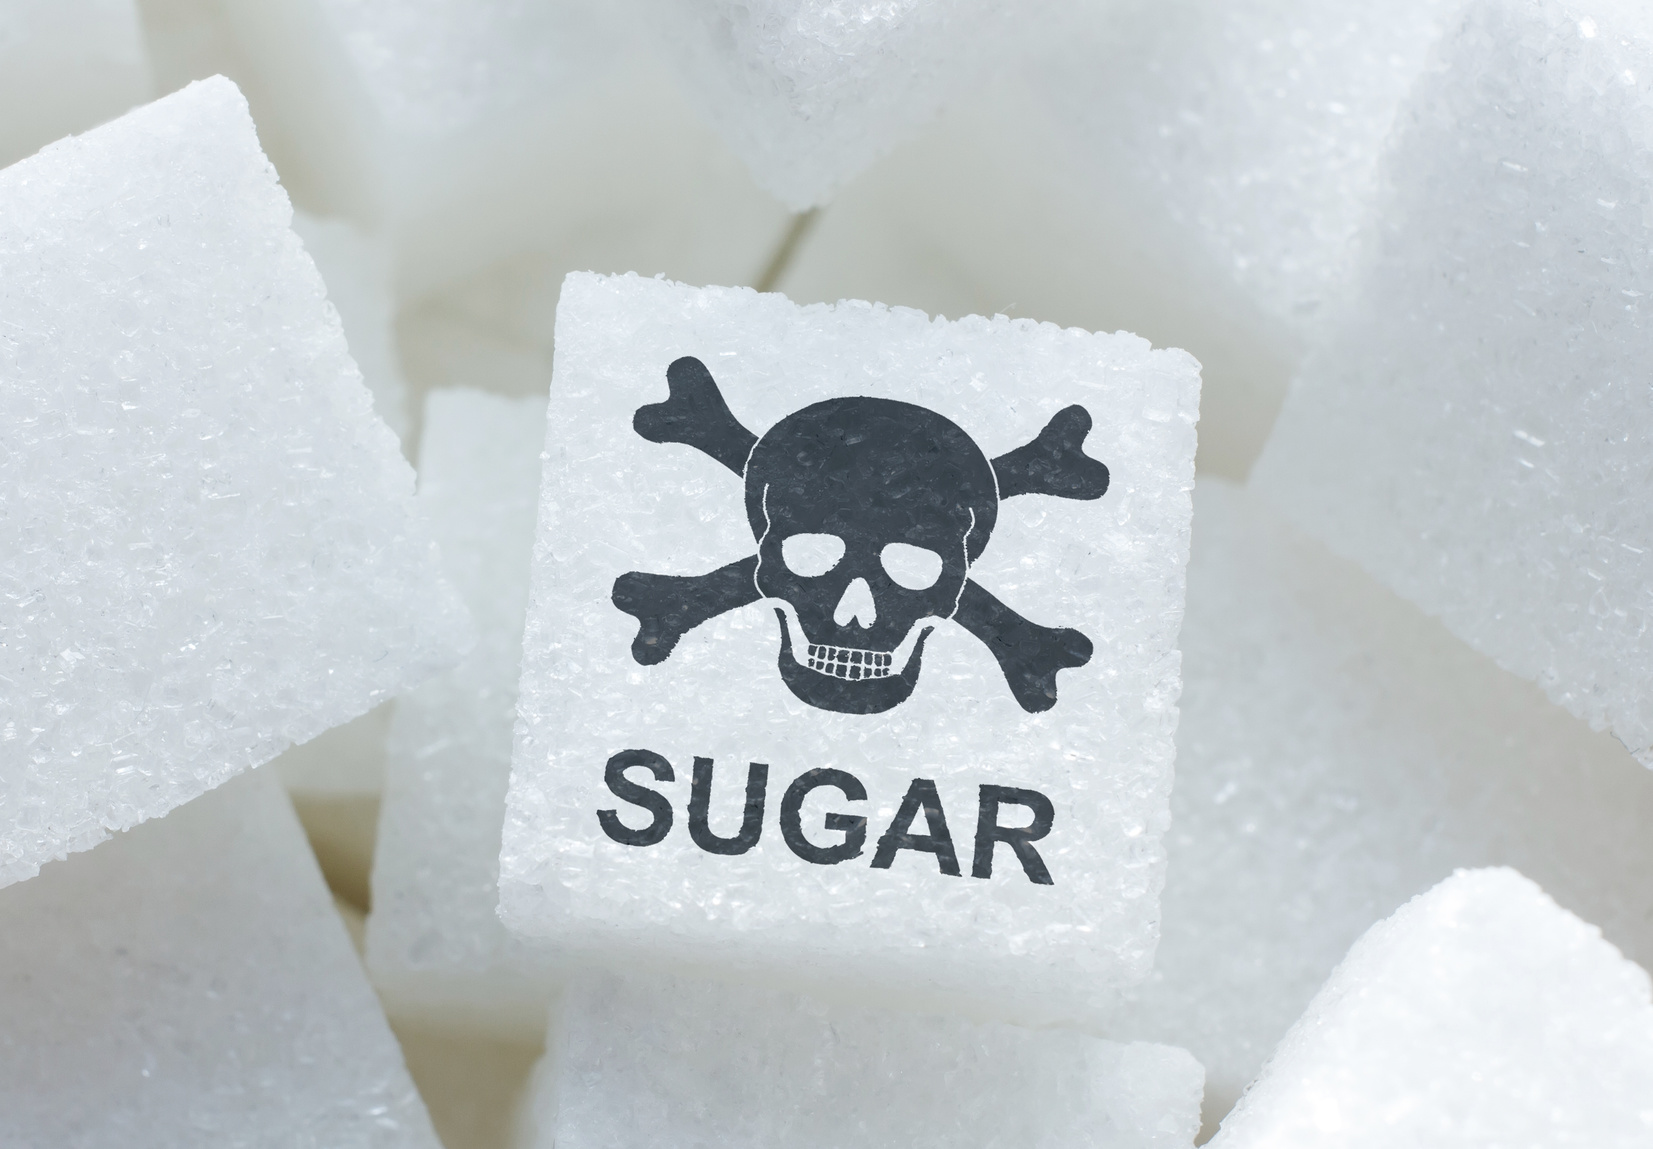 Research: G3PP can detoxify excess sugar